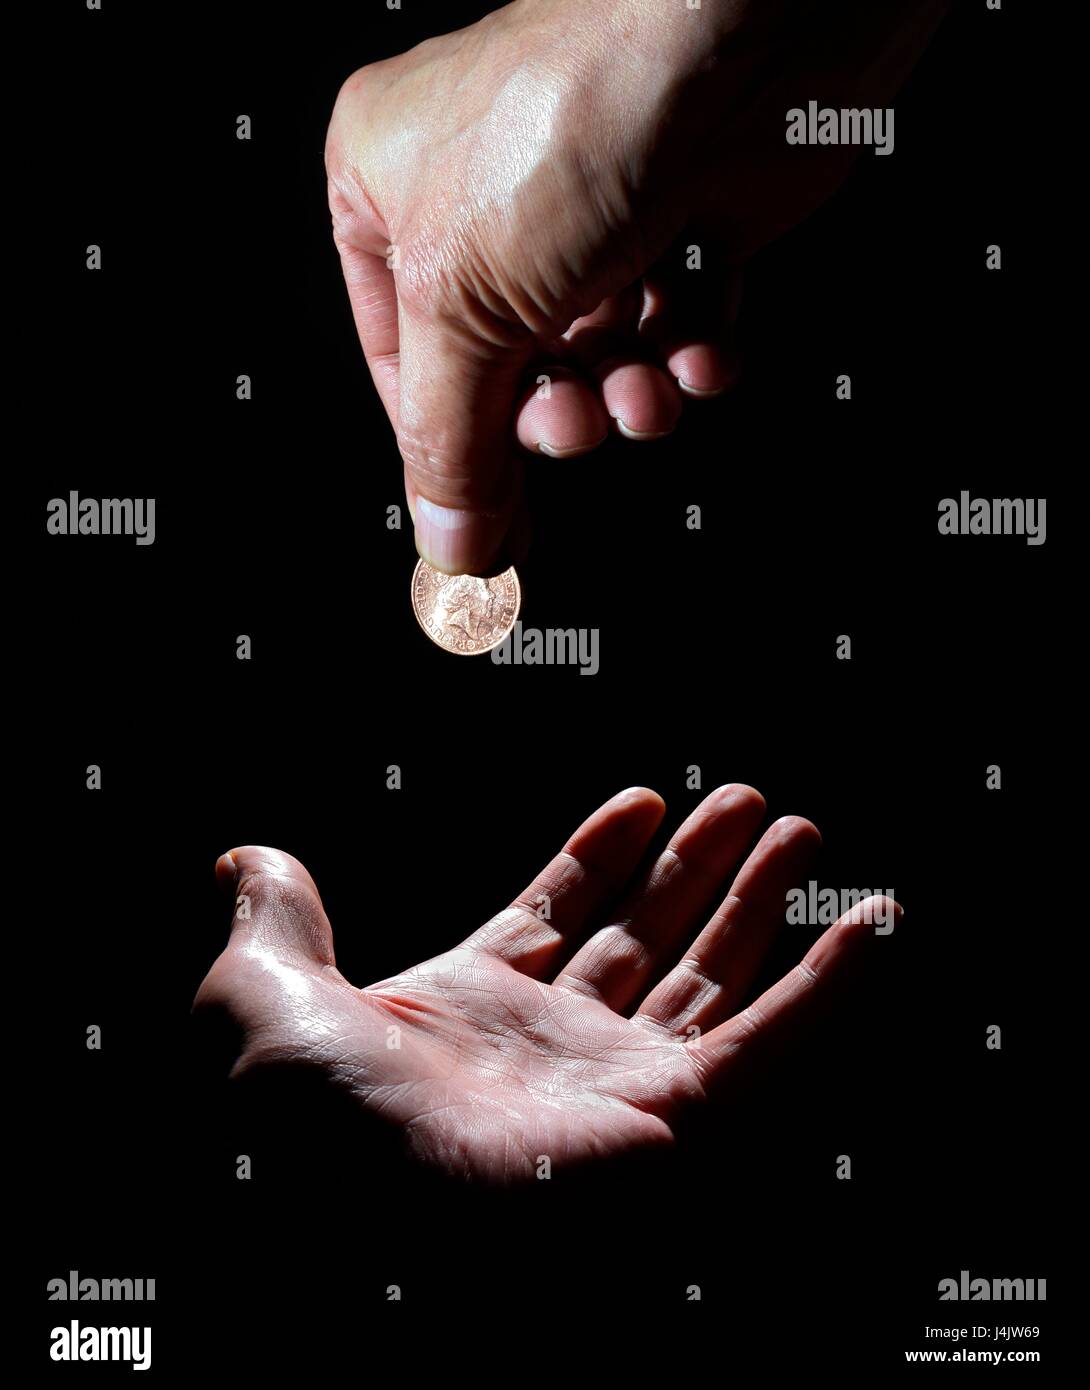 Person dropping coin on palm of hand, studio shot. Stock Photo